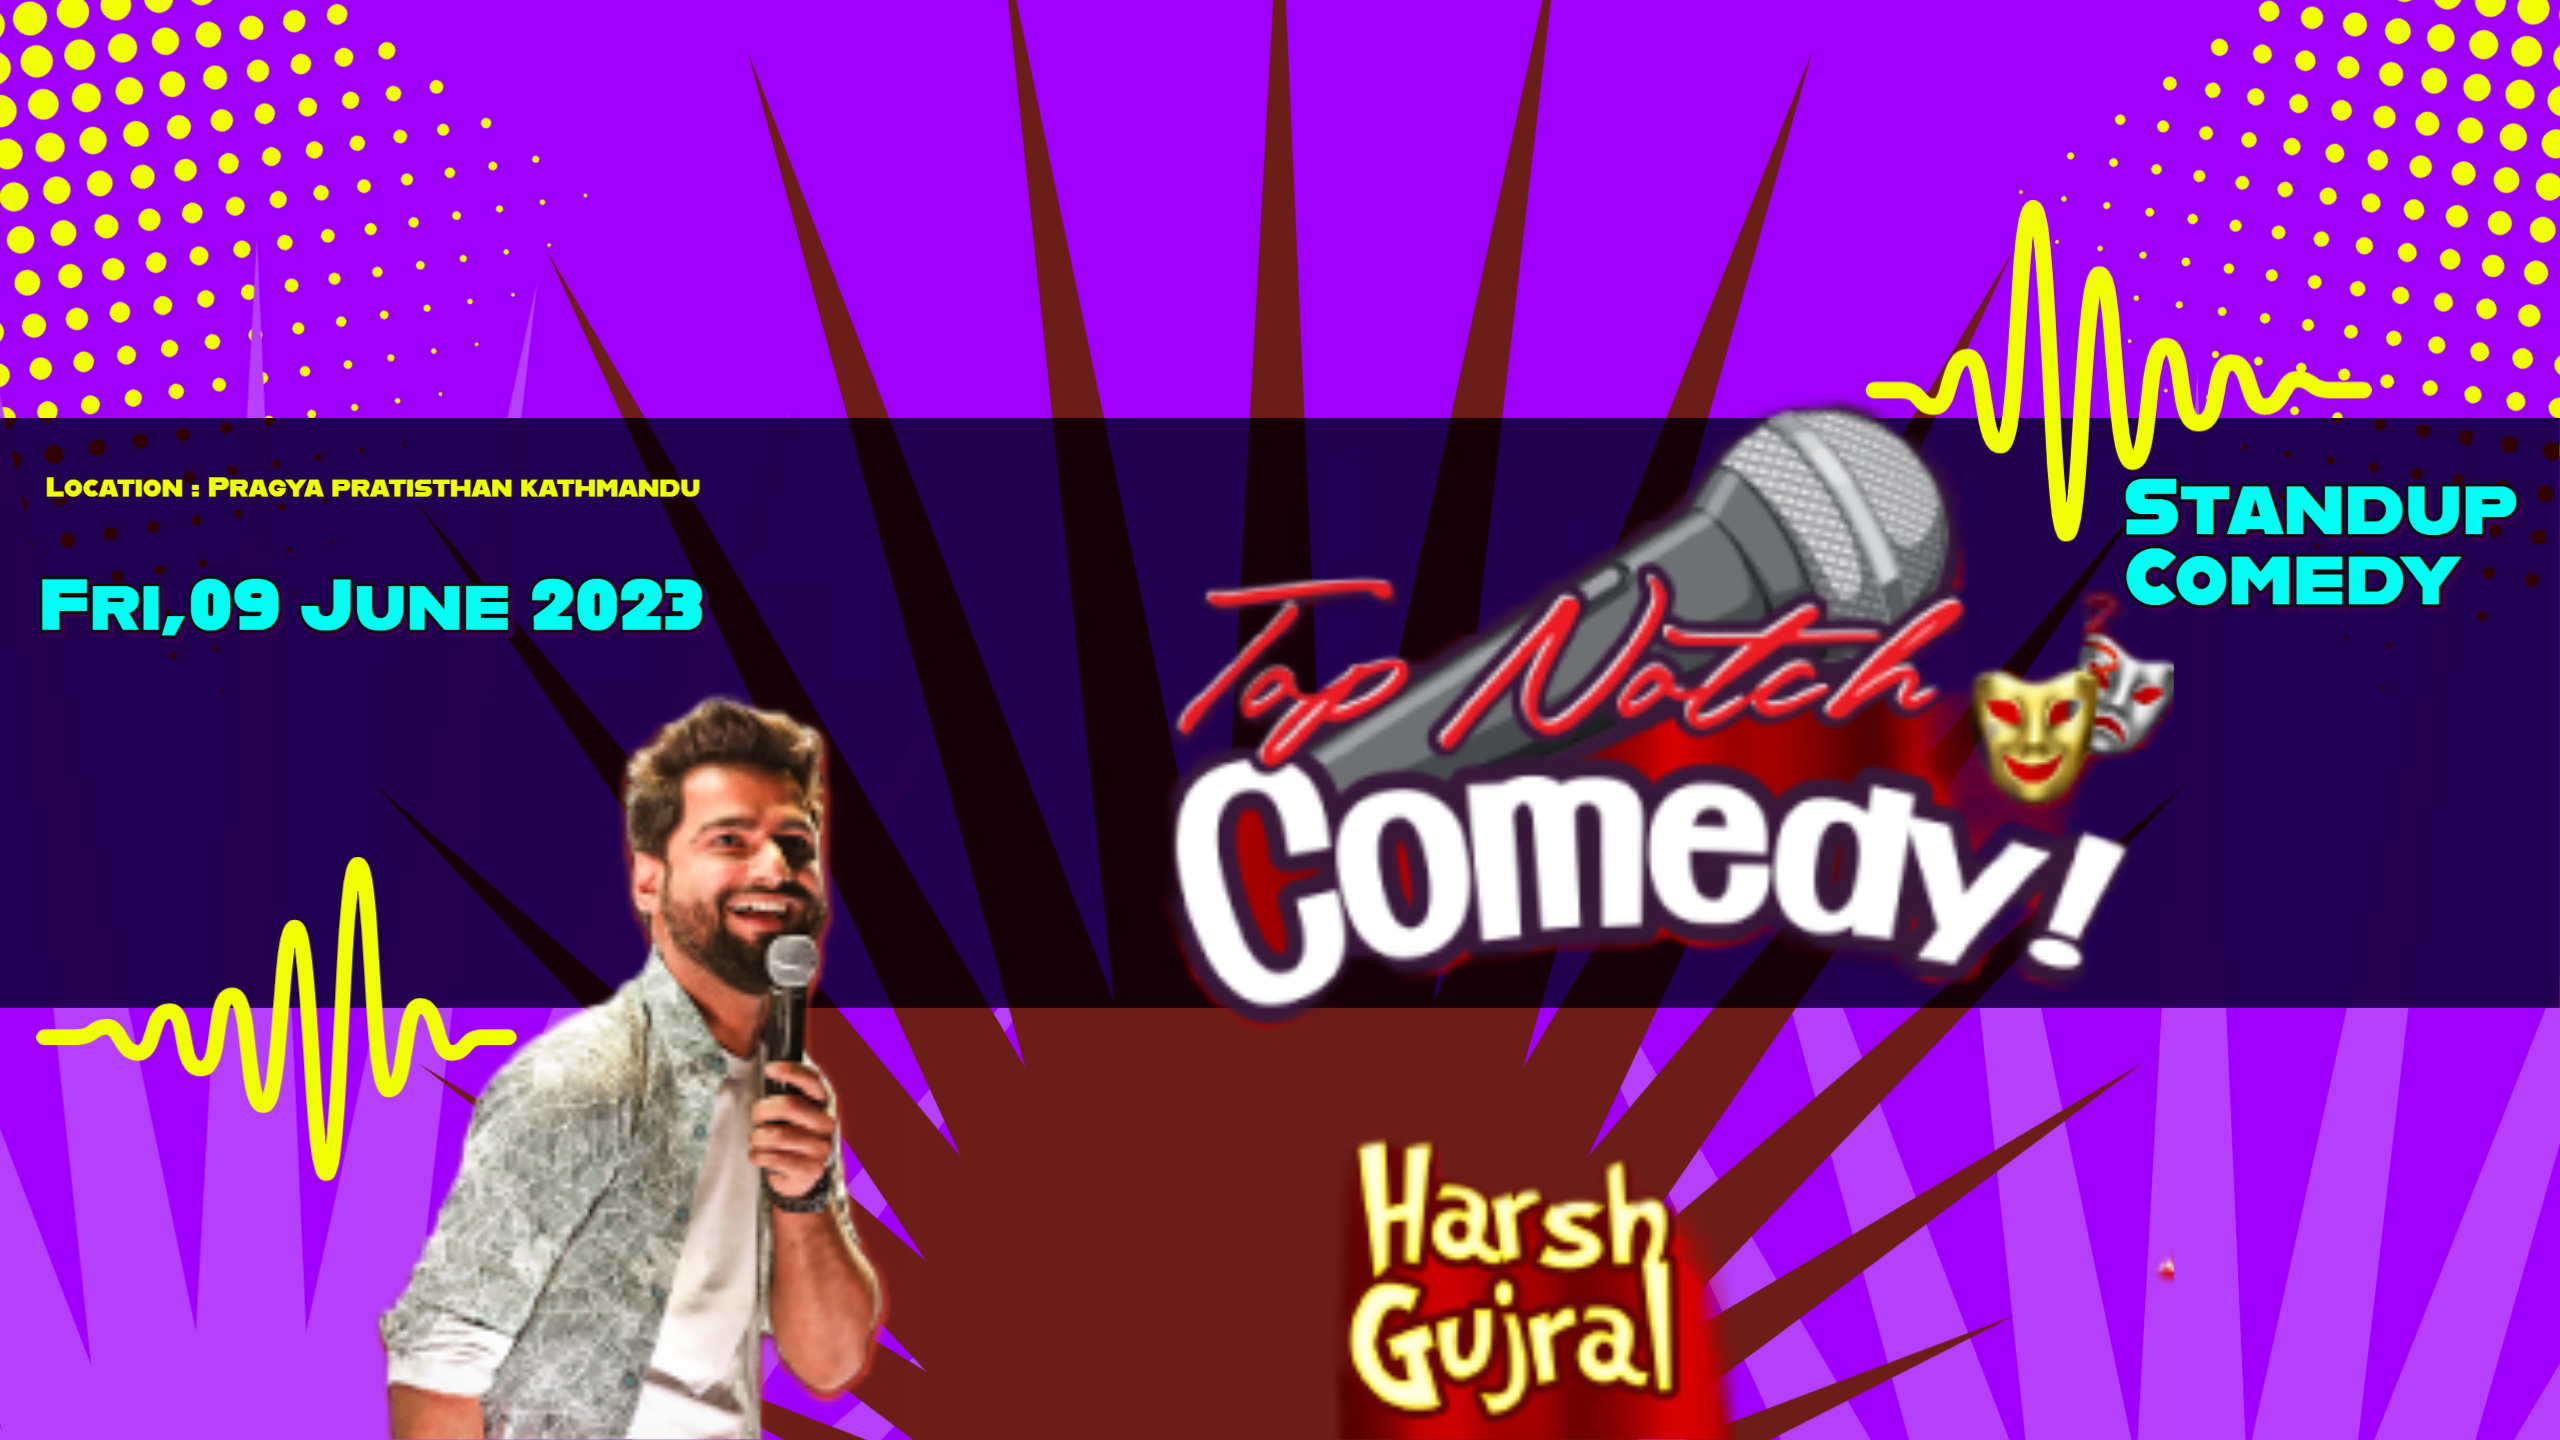 Harsh Gujral is popular stand-up artist performing first time ever in Nepal Poster